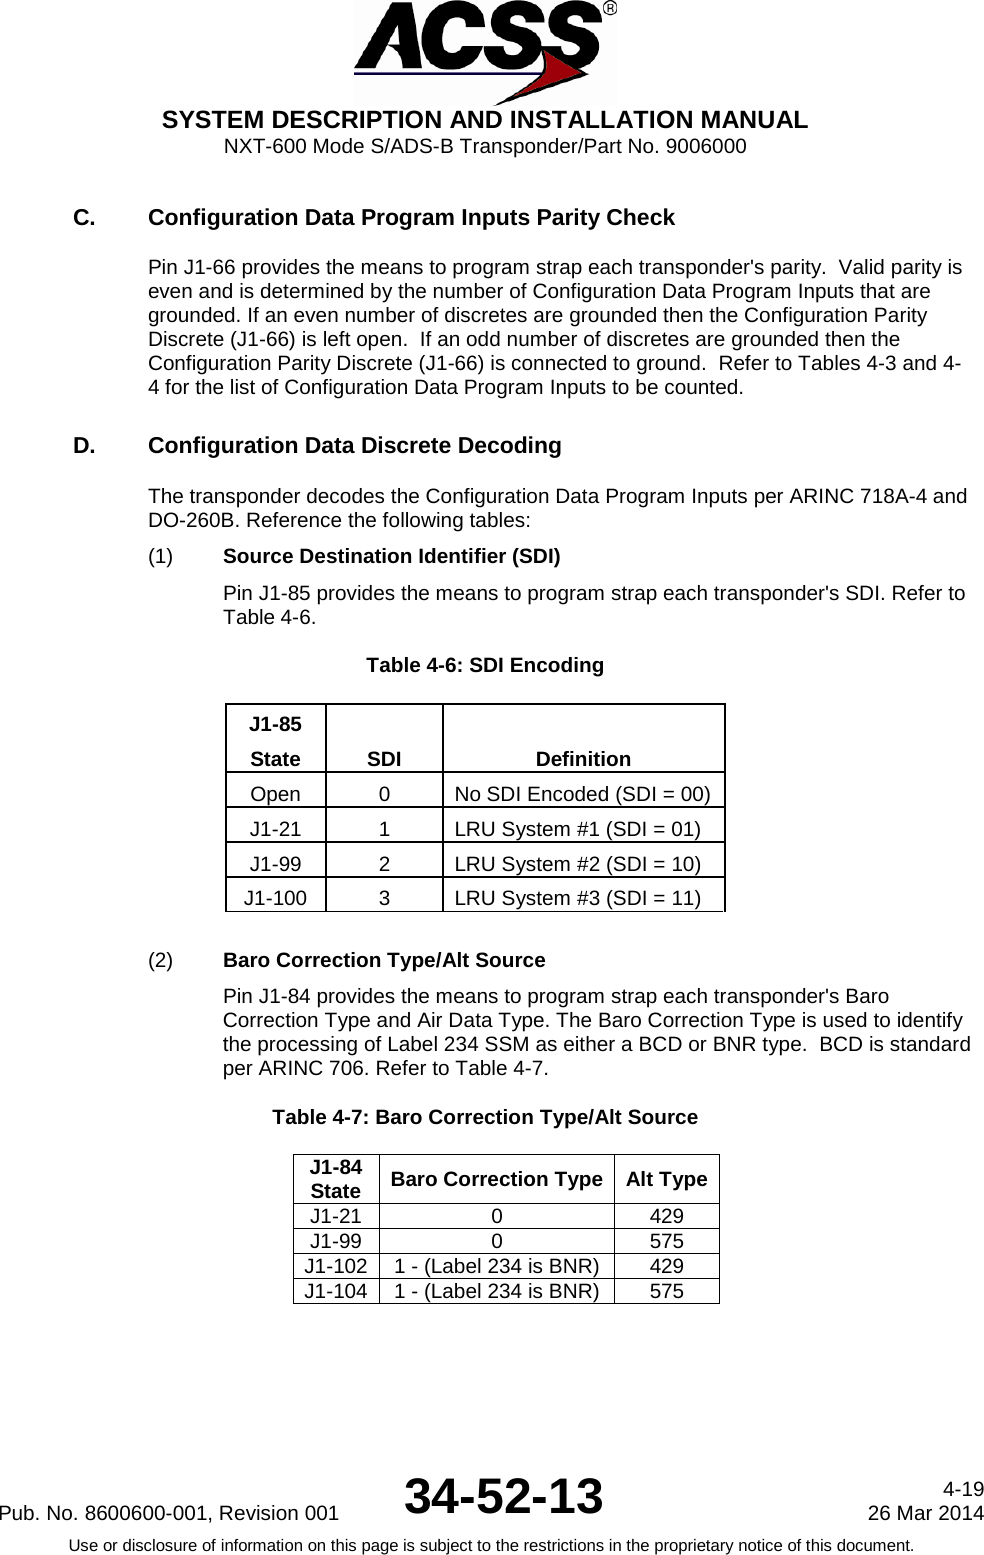  SYSTEM DESCRIPTION AND INSTALLATION MANUAL NXT-600 Mode S/ADS-B Transponder/Part No. 9006000 C. Configuration Data Program Inputs Parity Check Pin J1-66 provides the means to program strap each transponder&apos;s parity.  Valid parity is even and is determined by the number of Configuration Data Program Inputs that are grounded. If an even number of discretes are grounded then the Configuration Parity Discrete (J1-66) is left open.  If an odd number of discretes are grounded then the Configuration Parity Discrete (J1-66) is connected to ground.  Refer to Tables 4-3 and 4-4 for the list of Configuration Data Program Inputs to be counted. D. Configuration Data Discrete Decoding The transponder decodes the Configuration Data Program Inputs per ARINC 718A-4 and DO-260B. Reference the following tables: (1) Source Destination Identifier (SDI) Pin J1-85 provides the means to program strap each transponder&apos;s SDI. Refer to Table 4-6. Table 4-6: SDI Encoding J1-85 SDI Definition State Open 0 No SDI Encoded (SDI = 00) J1-21 1 LRU System #1 (SDI = 01) J1-99 2 LRU System #2 (SDI = 10) J1-100 3 LRU System #3 (SDI = 11)  (2) Baro Correction Type/Alt Source  Pin J1-84 provides the means to program strap each transponder&apos;s Baro Correction Type and Air Data Type. The Baro Correction Type is used to identify the processing of Label 234 SSM as either a BCD or BNR type.  BCD is standard per ARINC 706. Refer to Table 4-7. Table 4-7: Baro Correction Type/Alt Source  J1-84 State Baro Correction Type Alt Type J1-21 0 429 J1-99 0 575 J1-102 1 - (Label 234 is BNR) 429 J1-104 1 - (Label 234 is BNR) 575  Pub. No. 8600600-001, Revision 001 34-52-13 4-19 26 Mar 2014 Use or disclosure of information on this page is subject to the restrictions in the proprietary notice of this document.  